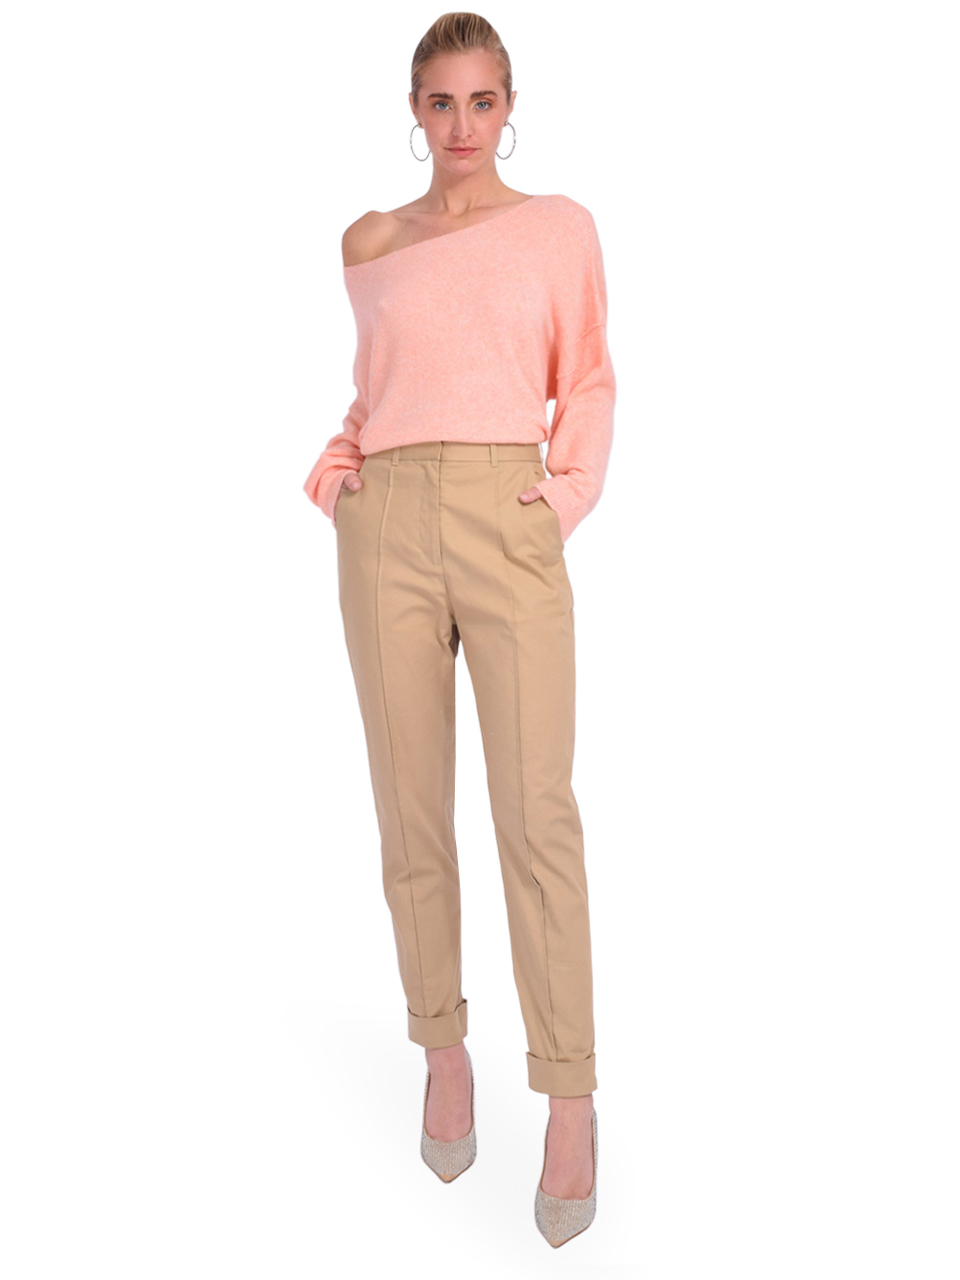 3.1 Phillip Lim Cropped Carrot Trouser in Khaki Full Outfit 

